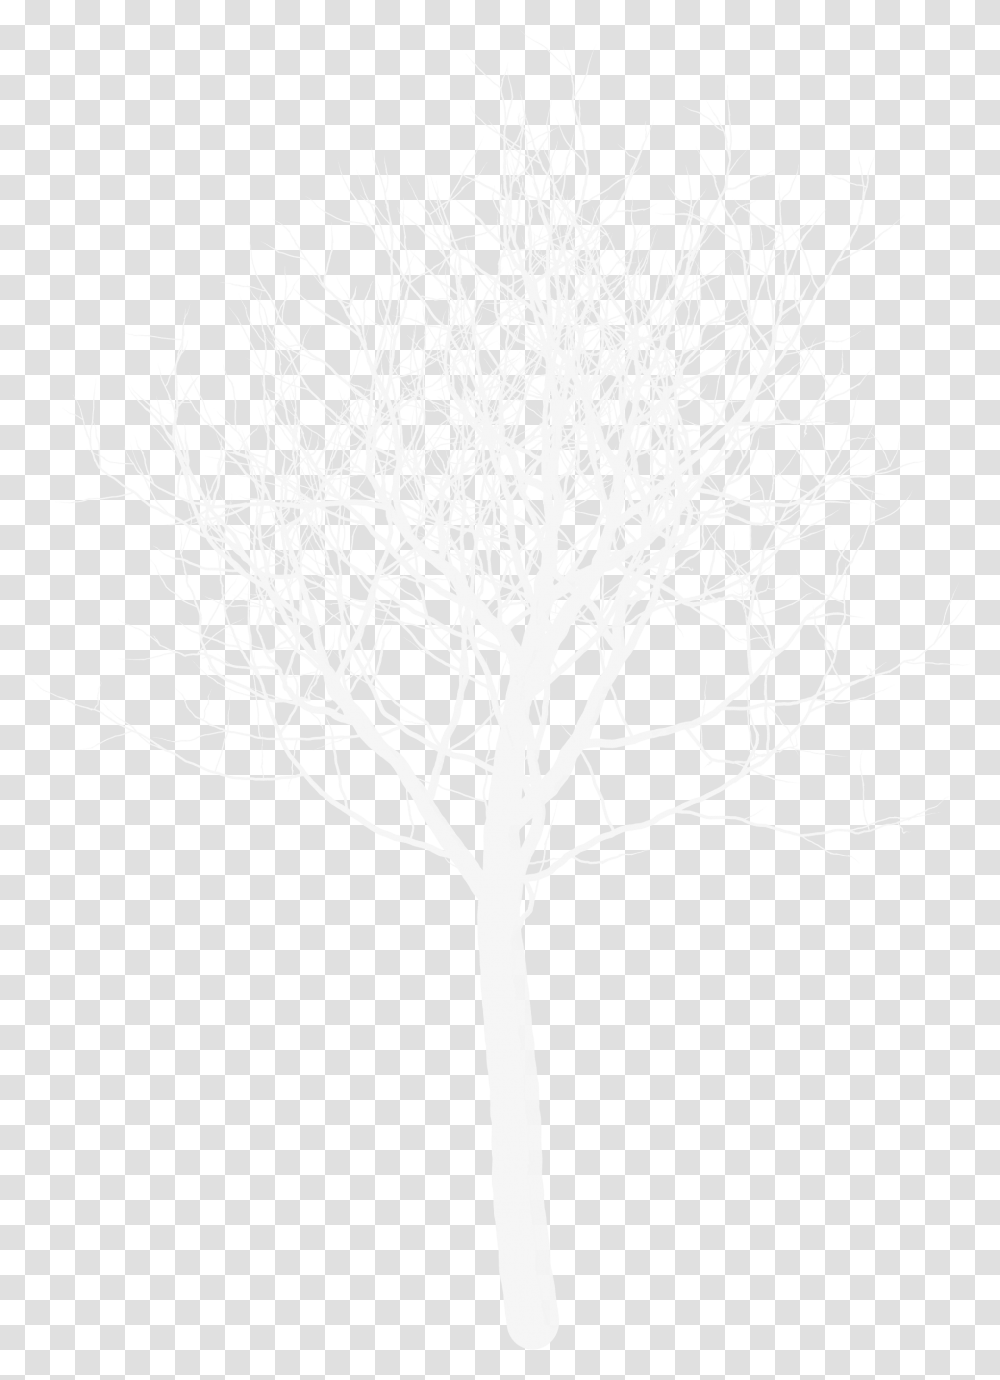 Tree Naked 2 Image Darkness, Plant, Cross, Symbol, Silhouette Transparent Png